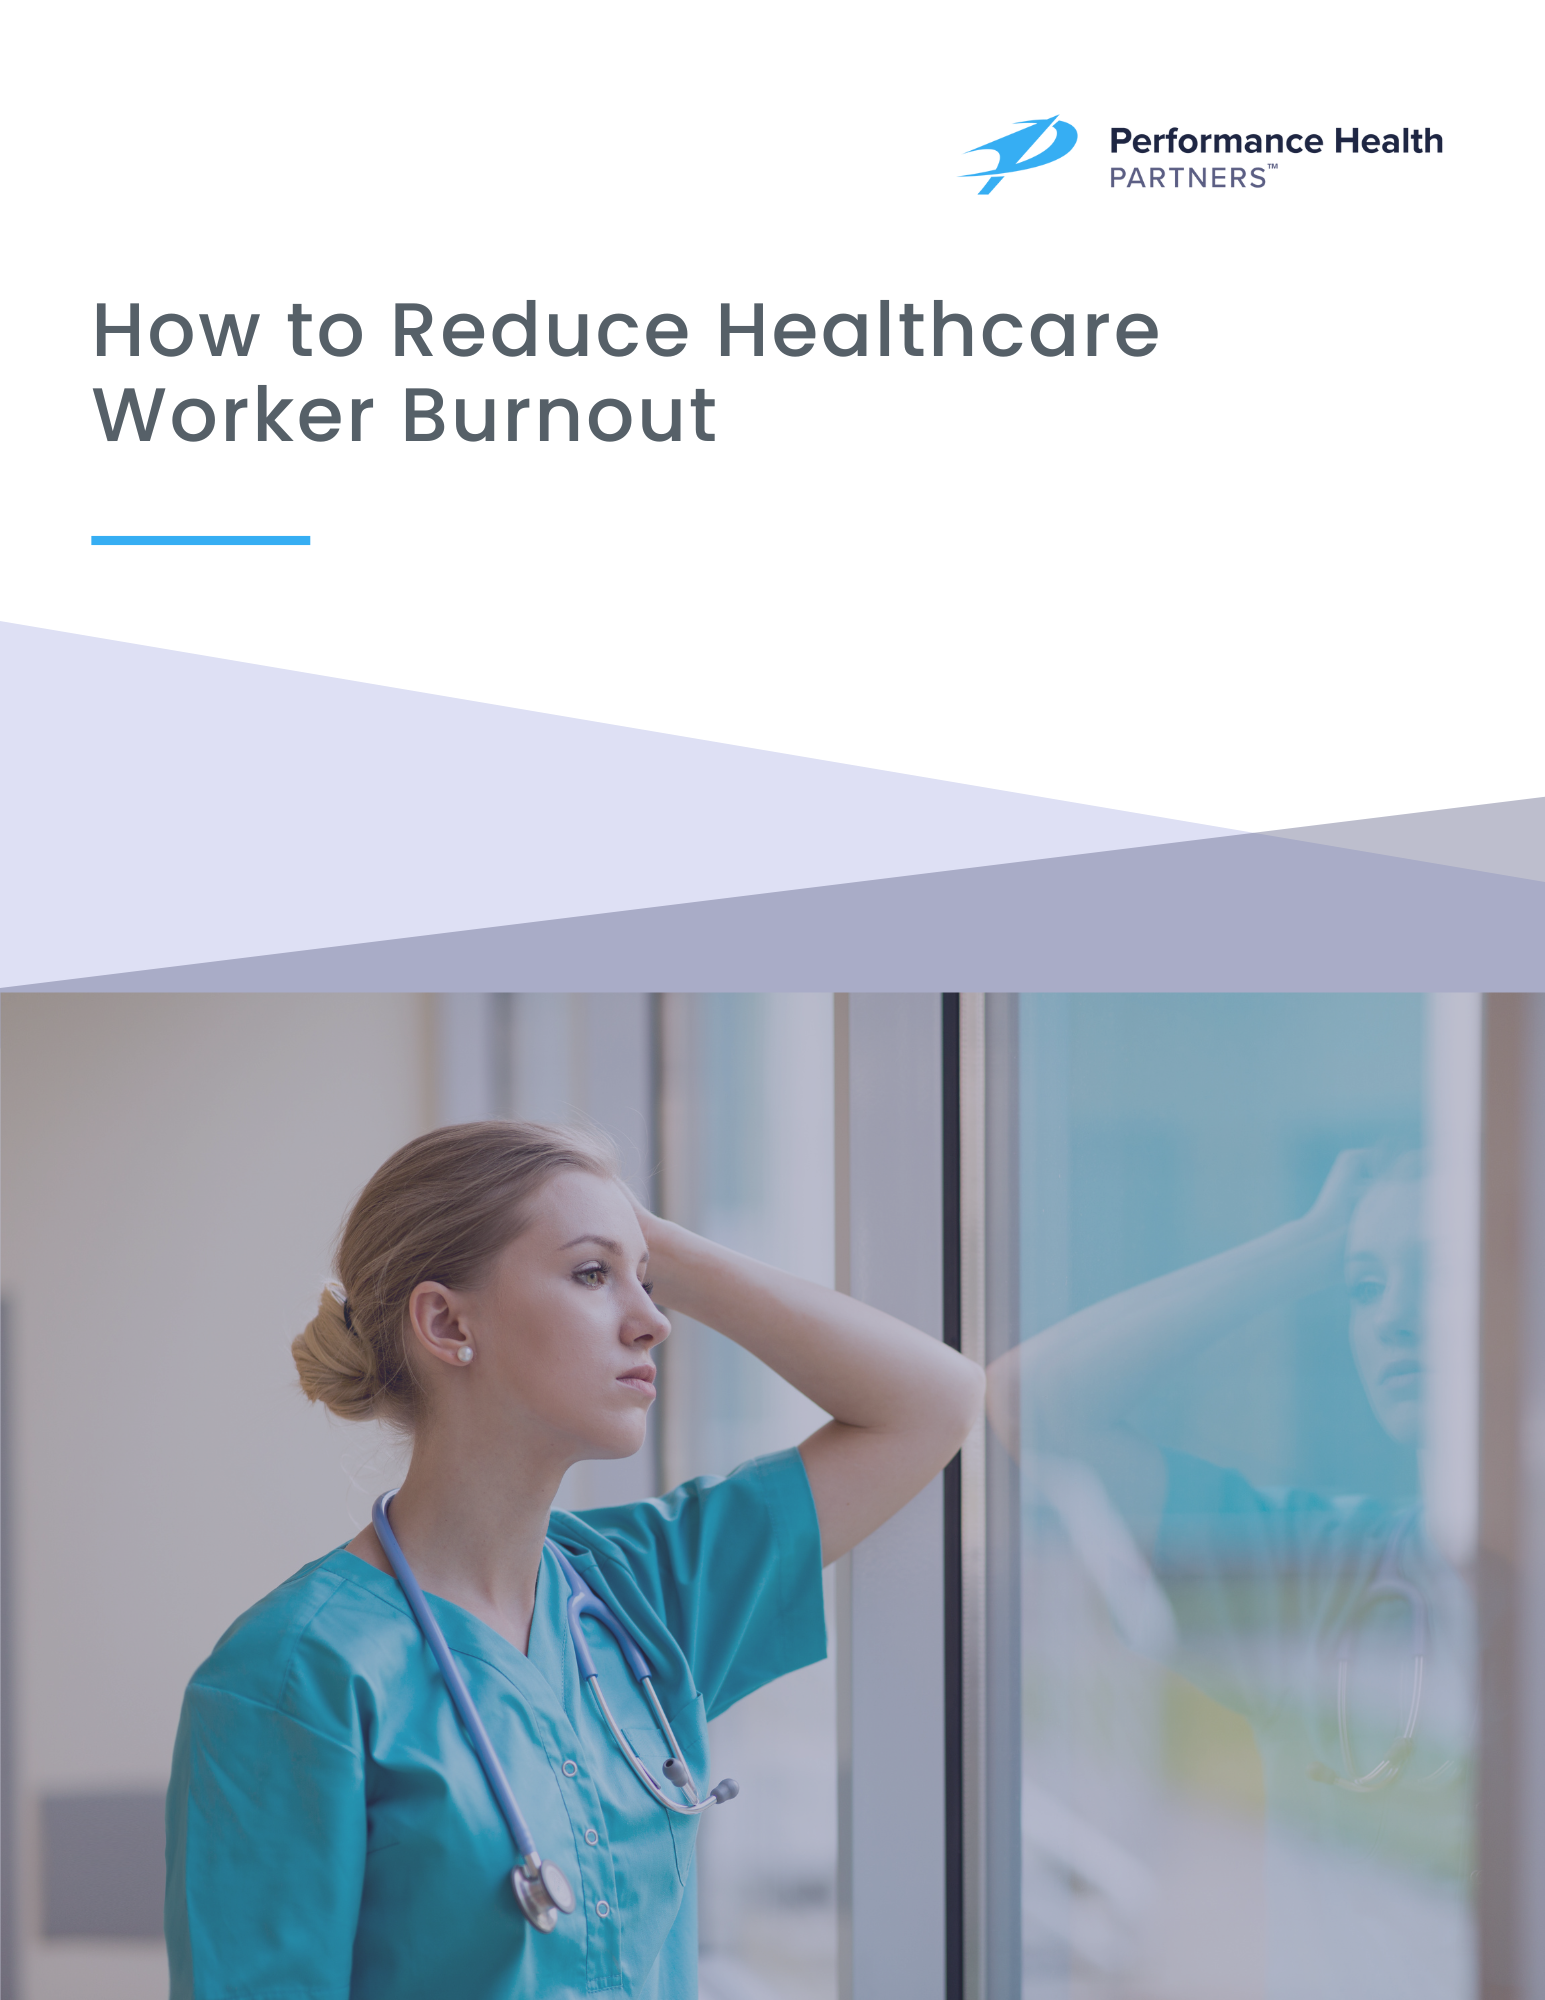 How to Reduce Worker Burnout White Paper